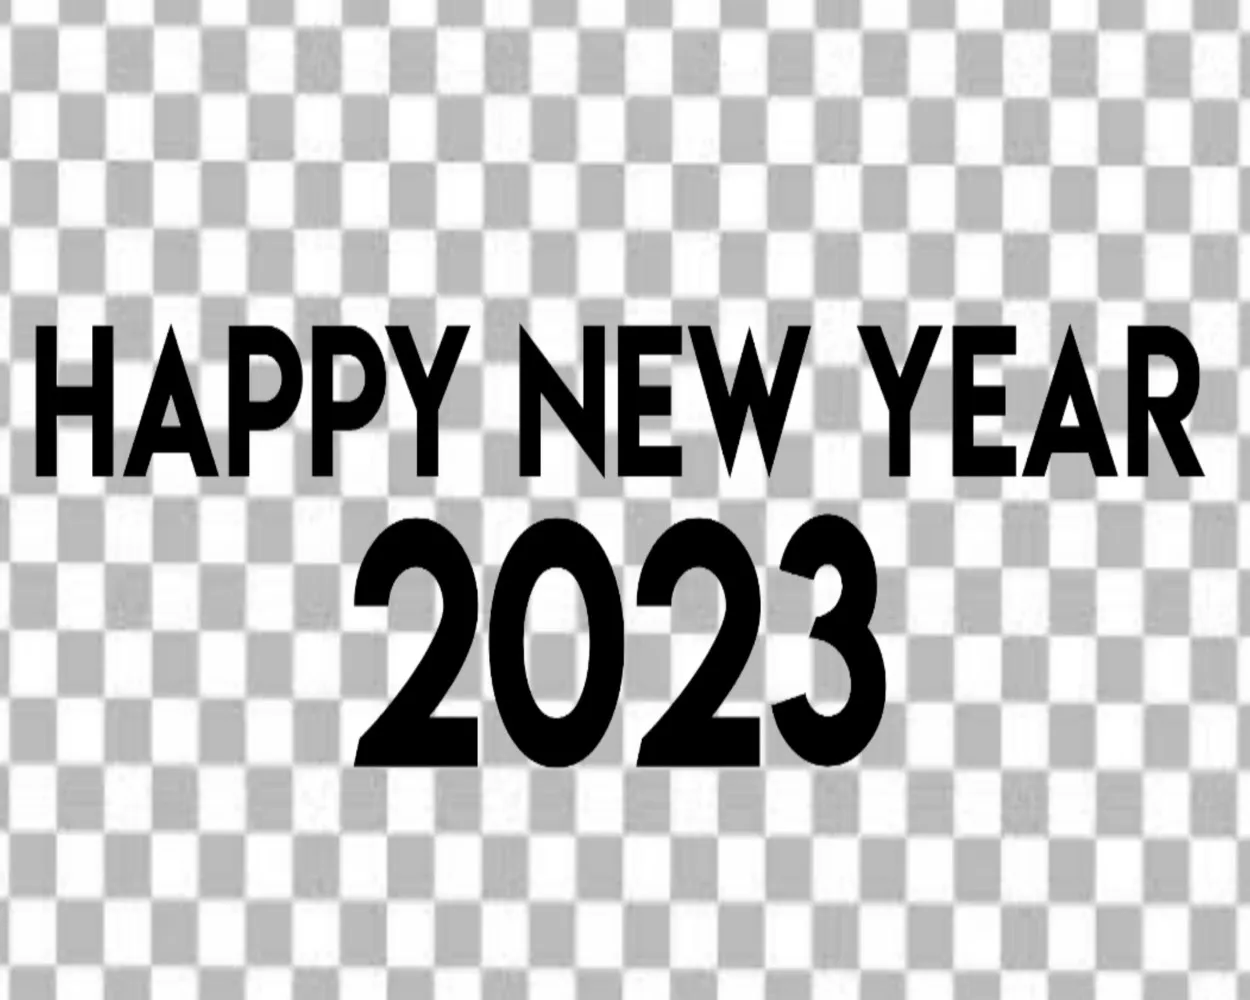 You are currently viewing Happy new year 2023 text png download free